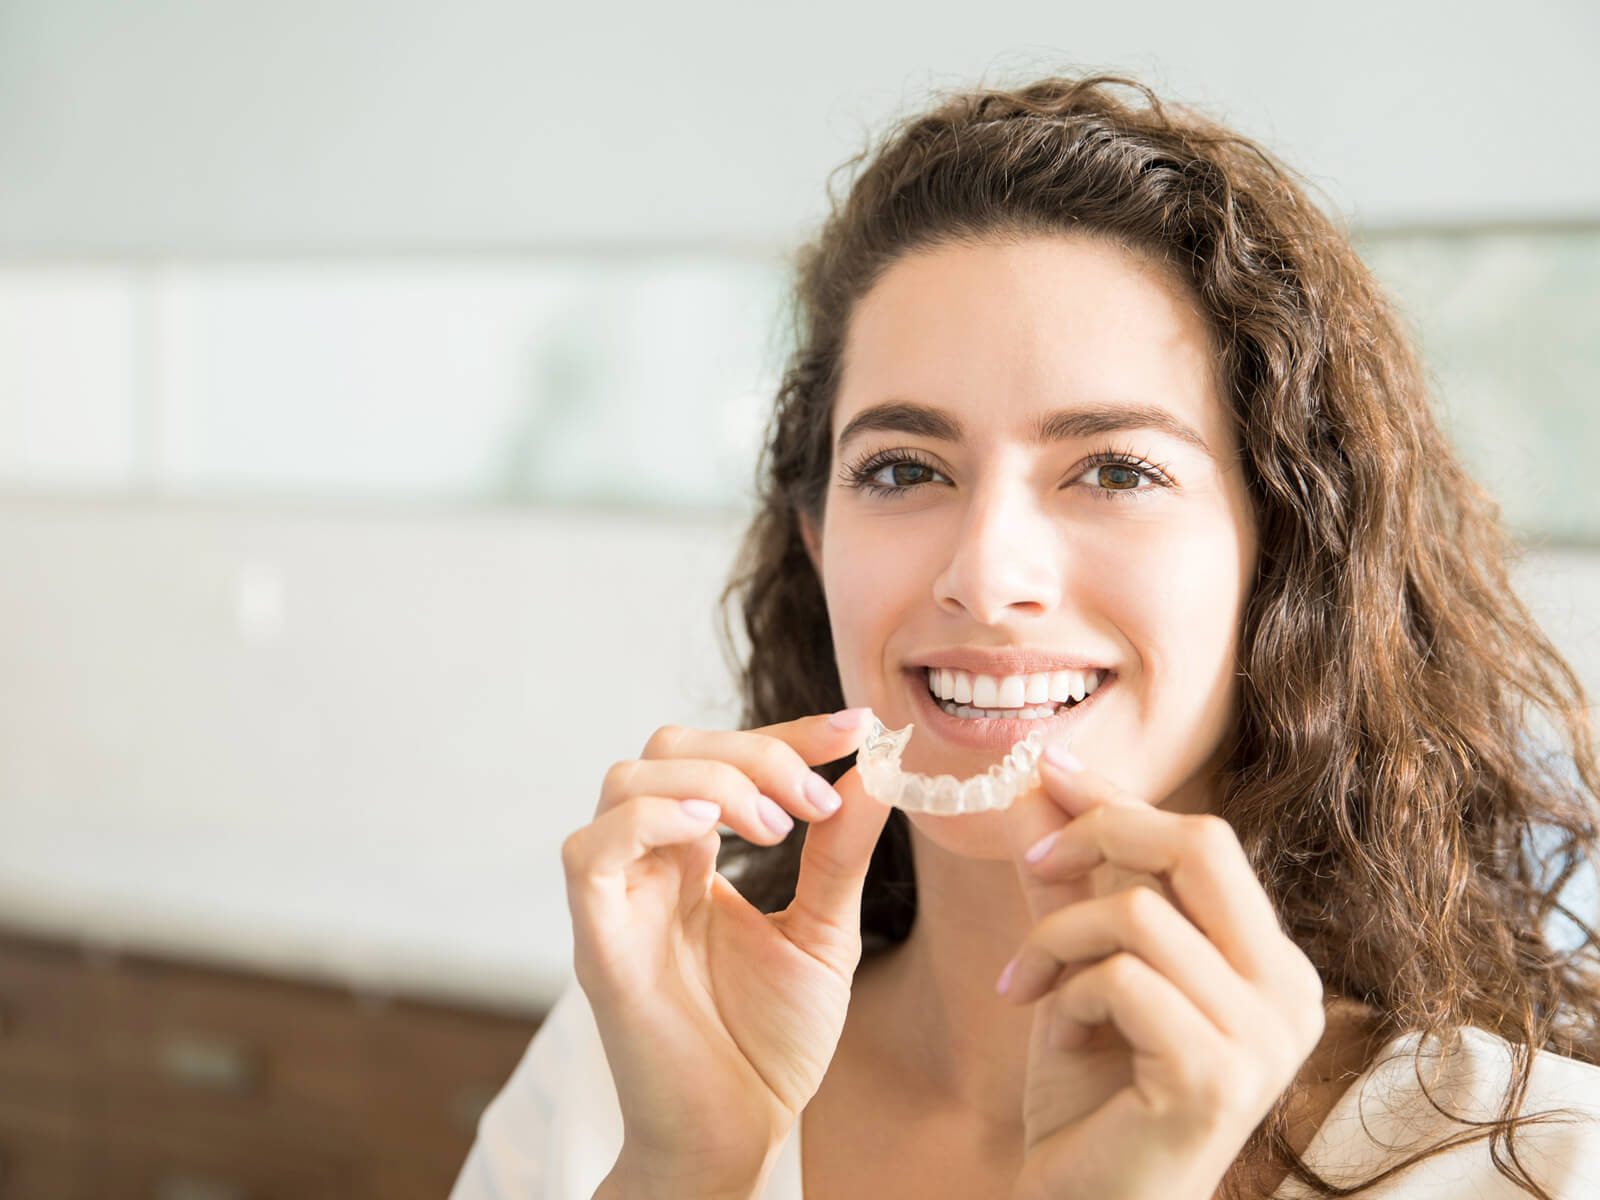 What To Eat When Wearing Aligners?